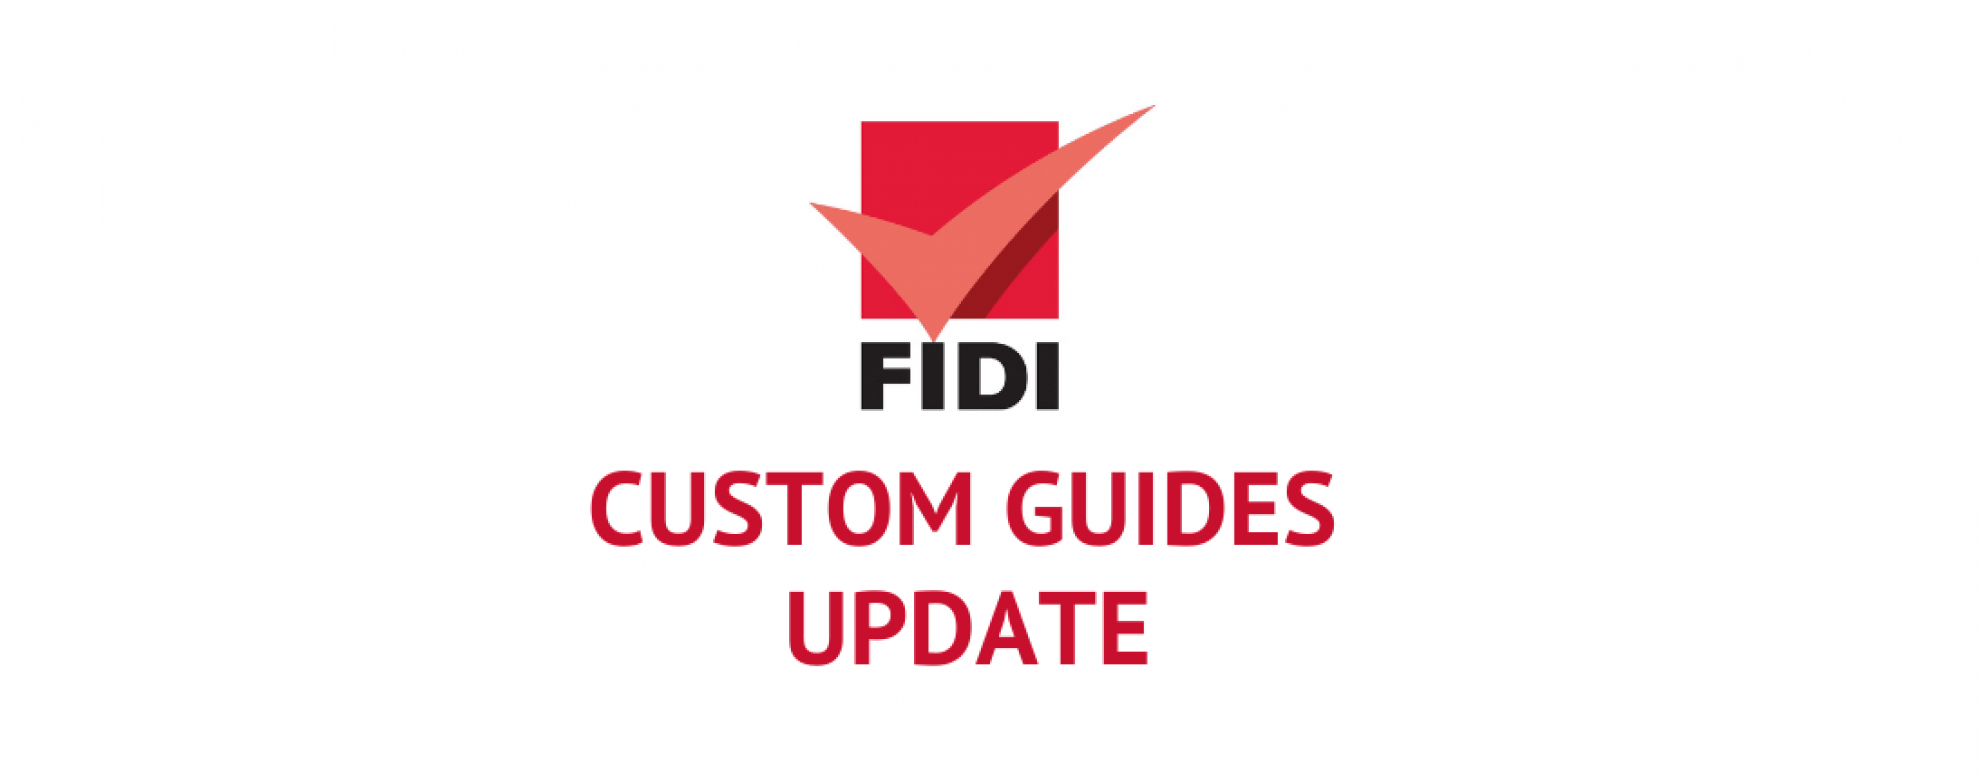 Lebanon's customs guides have been updated